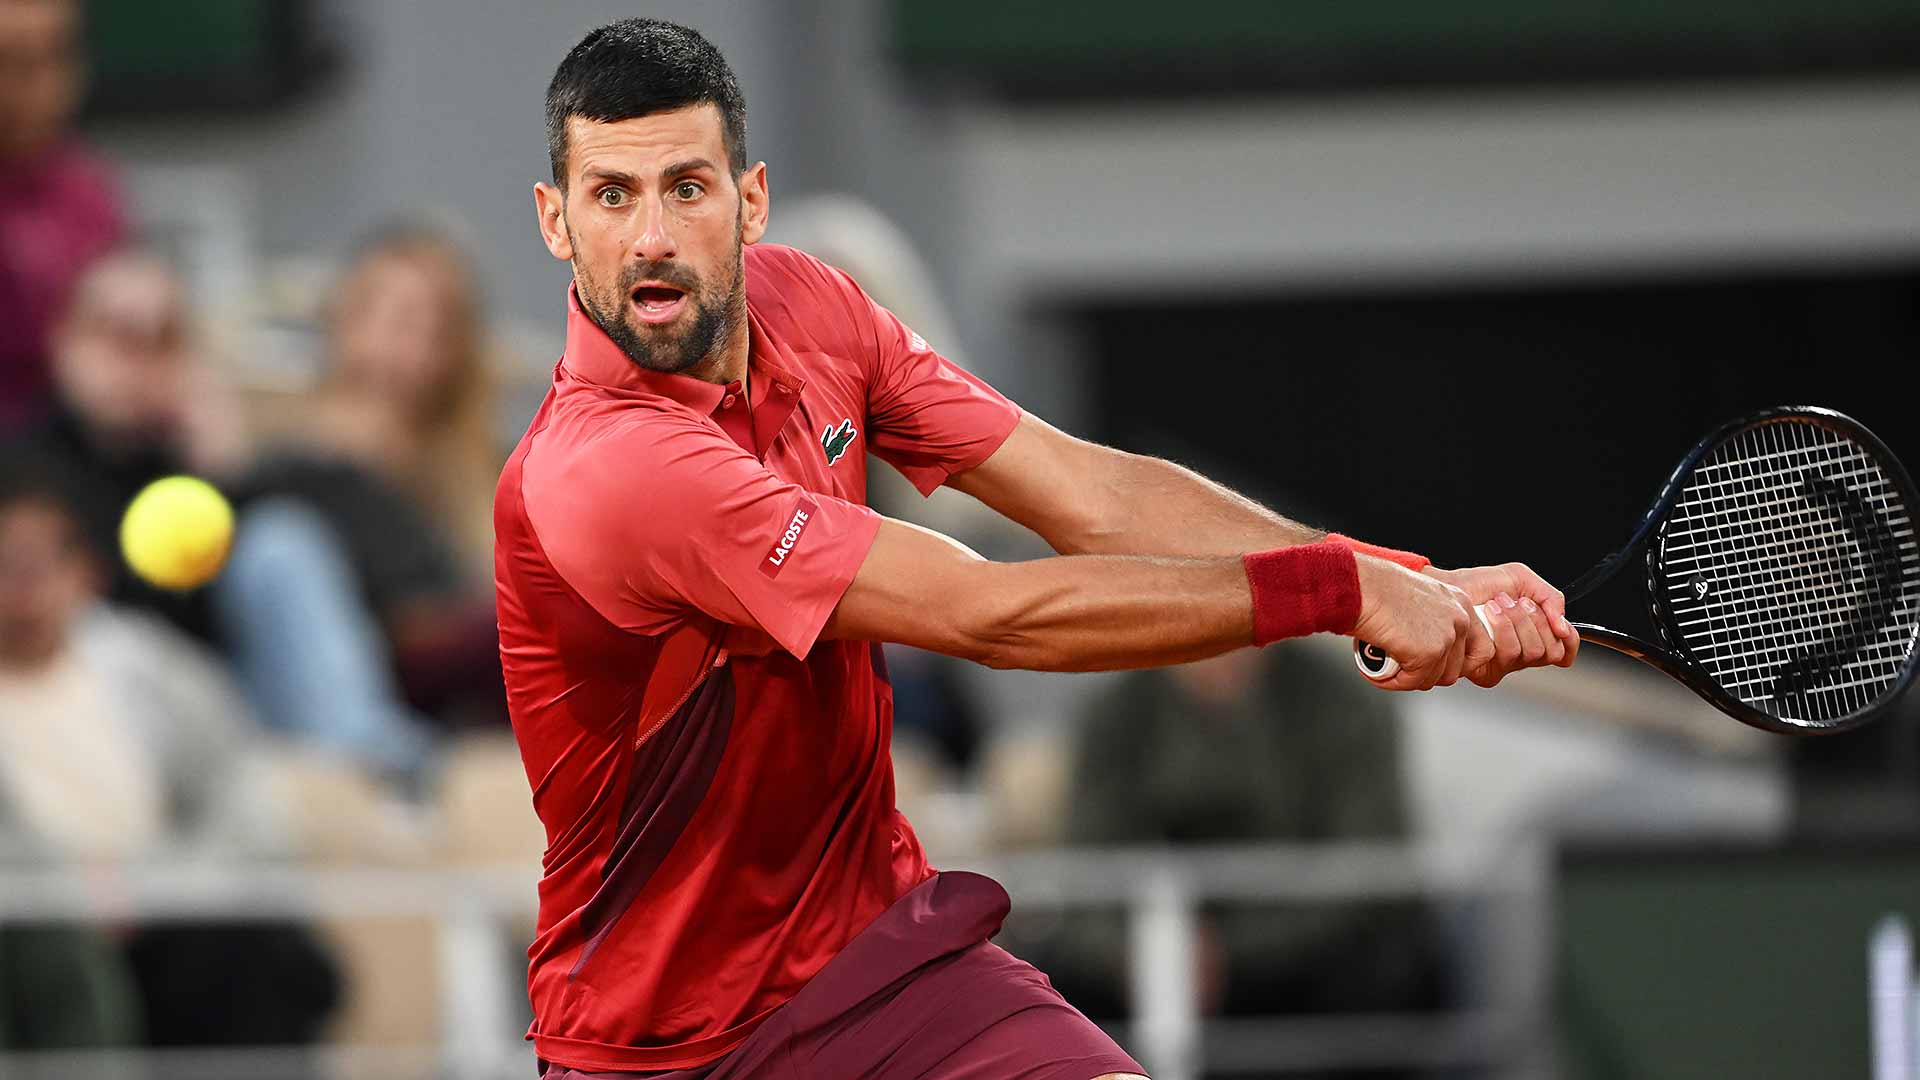 Novak Djokovic must reach the Roland Garros final to have a chance of remaining World No. 1.